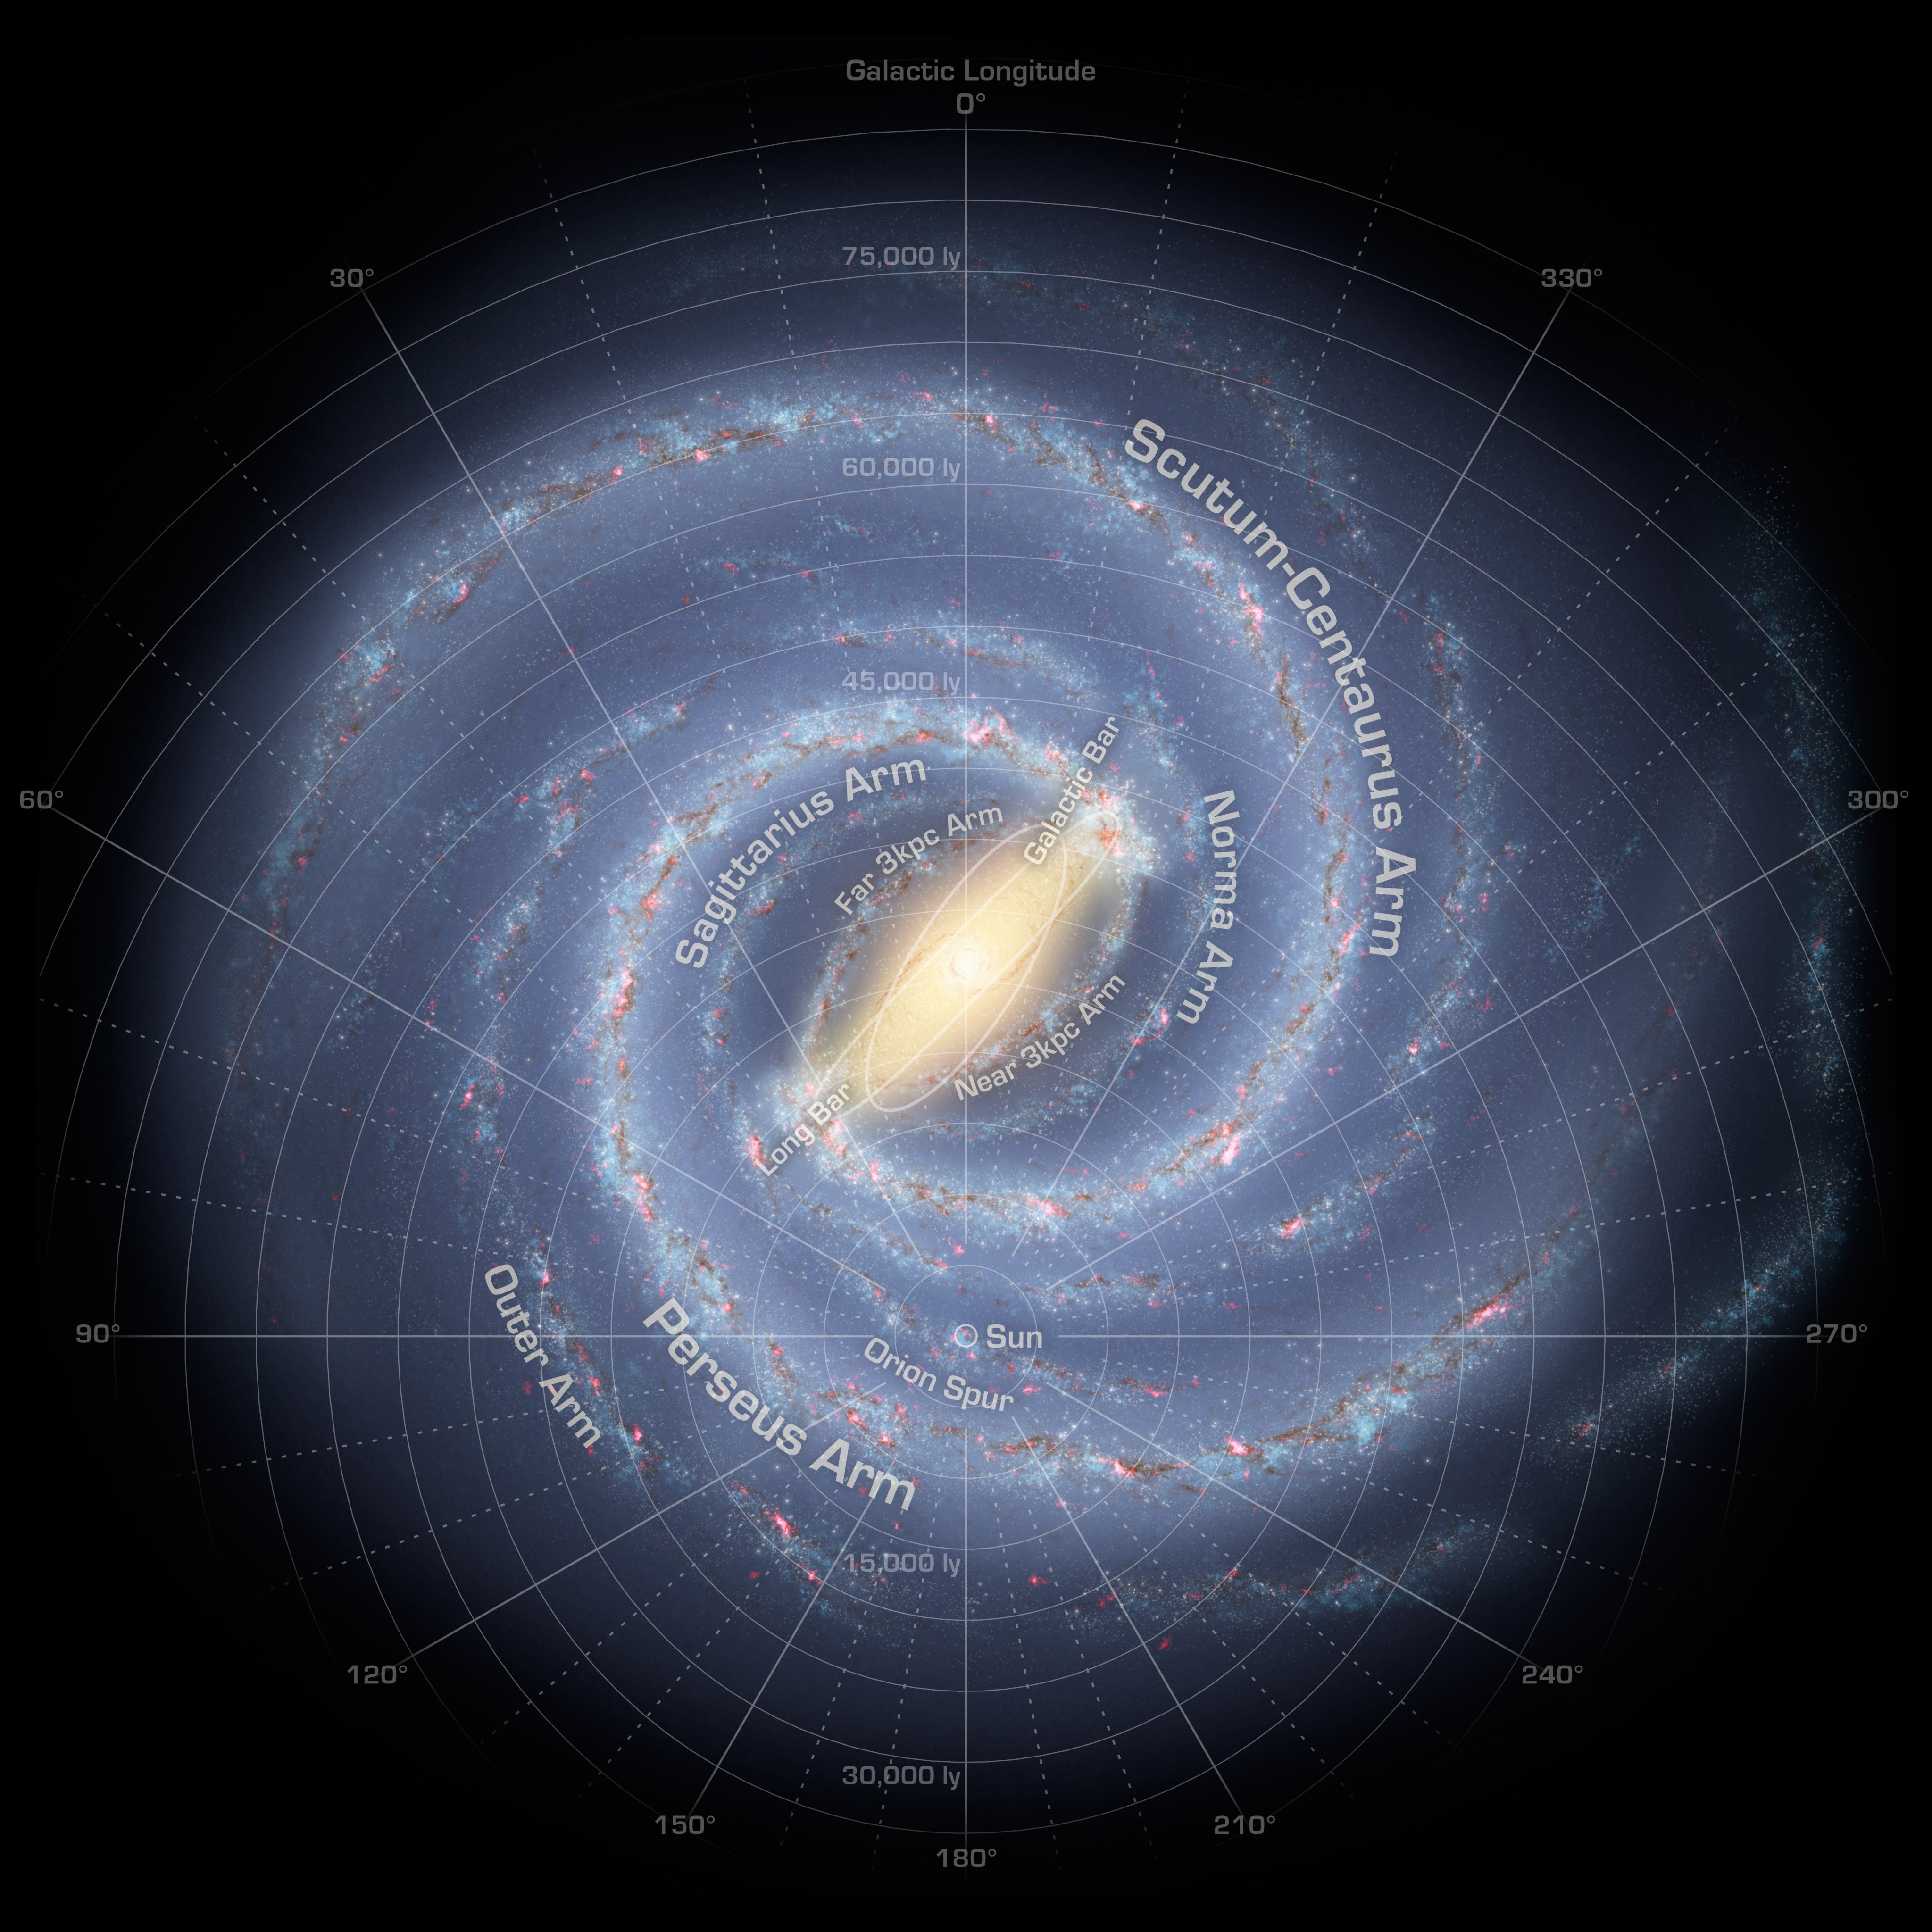 Illustration of our galaxy with and without labels.